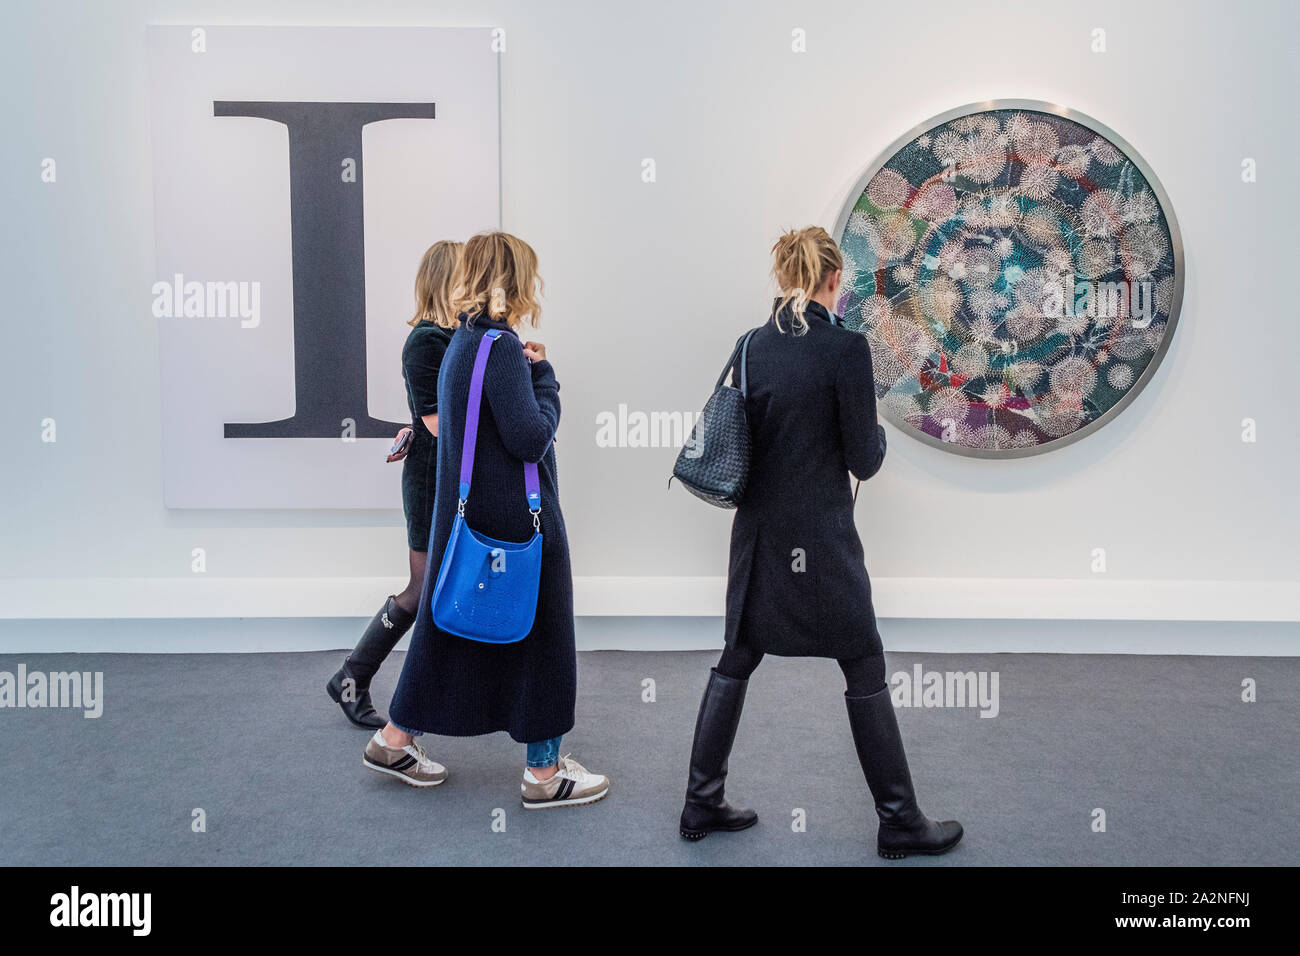 London, UK. 3rd Oct 2019. Self Portrait (Modern No 20 Bold) by Mark Wallinger and Algorithm for Tectonic Regroupings and Divergent Boundaries, 2018, by Bharti Kher in Hauser & Wirth - Frieze London, an annual Art Fair in Regents Park. It brings together more than 160 of the world’s leading contemporary galleries, with special curated sections: Focus, showcasing emerging talent; LIVE, a platform for performance art; and new for 2019, Woven, which explores textiles, weaving and the legacies of colonialism.  It remains open till 6 Oct 2019. Credit: Guy Bell/Alamy Live News Stock Photo